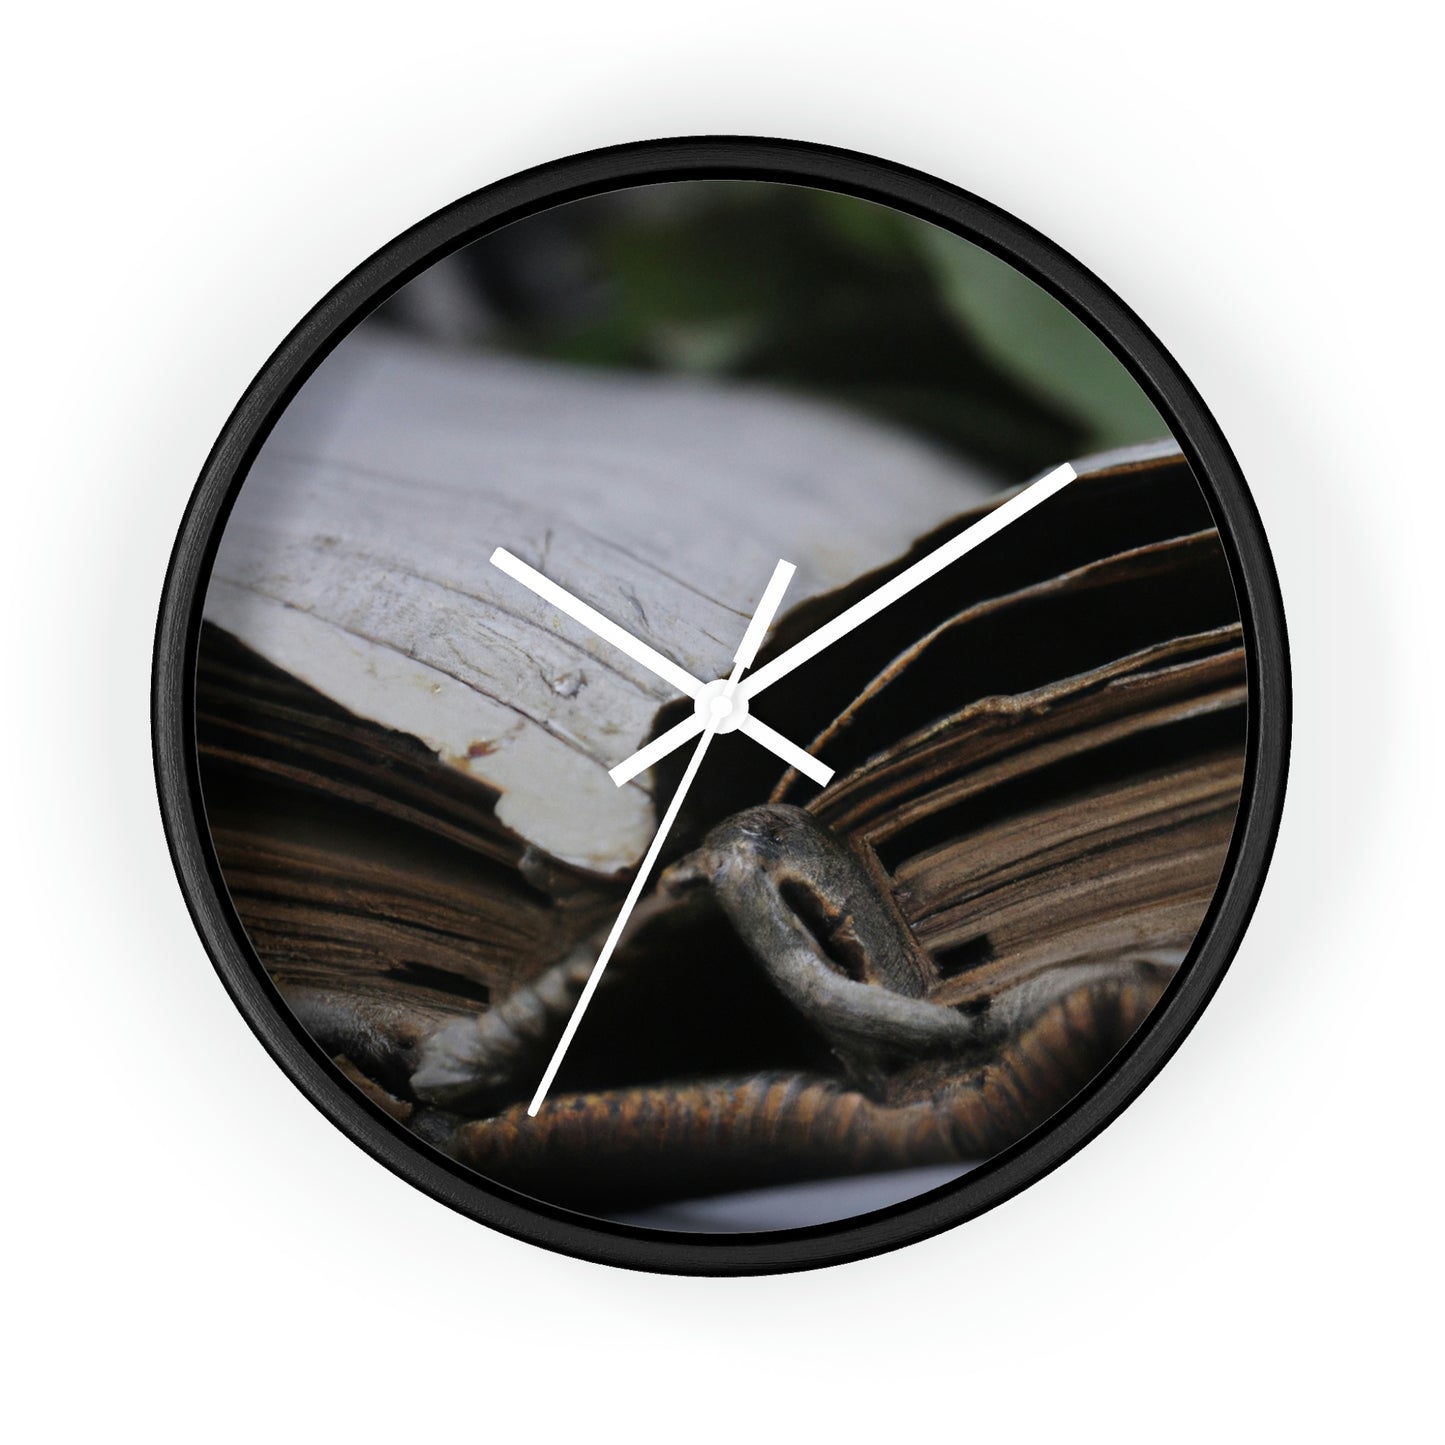 Unbeknownst to its readers, the book possesses magical powers.

"The Forgotten Tome of Magic" - The Alien Wall Clock